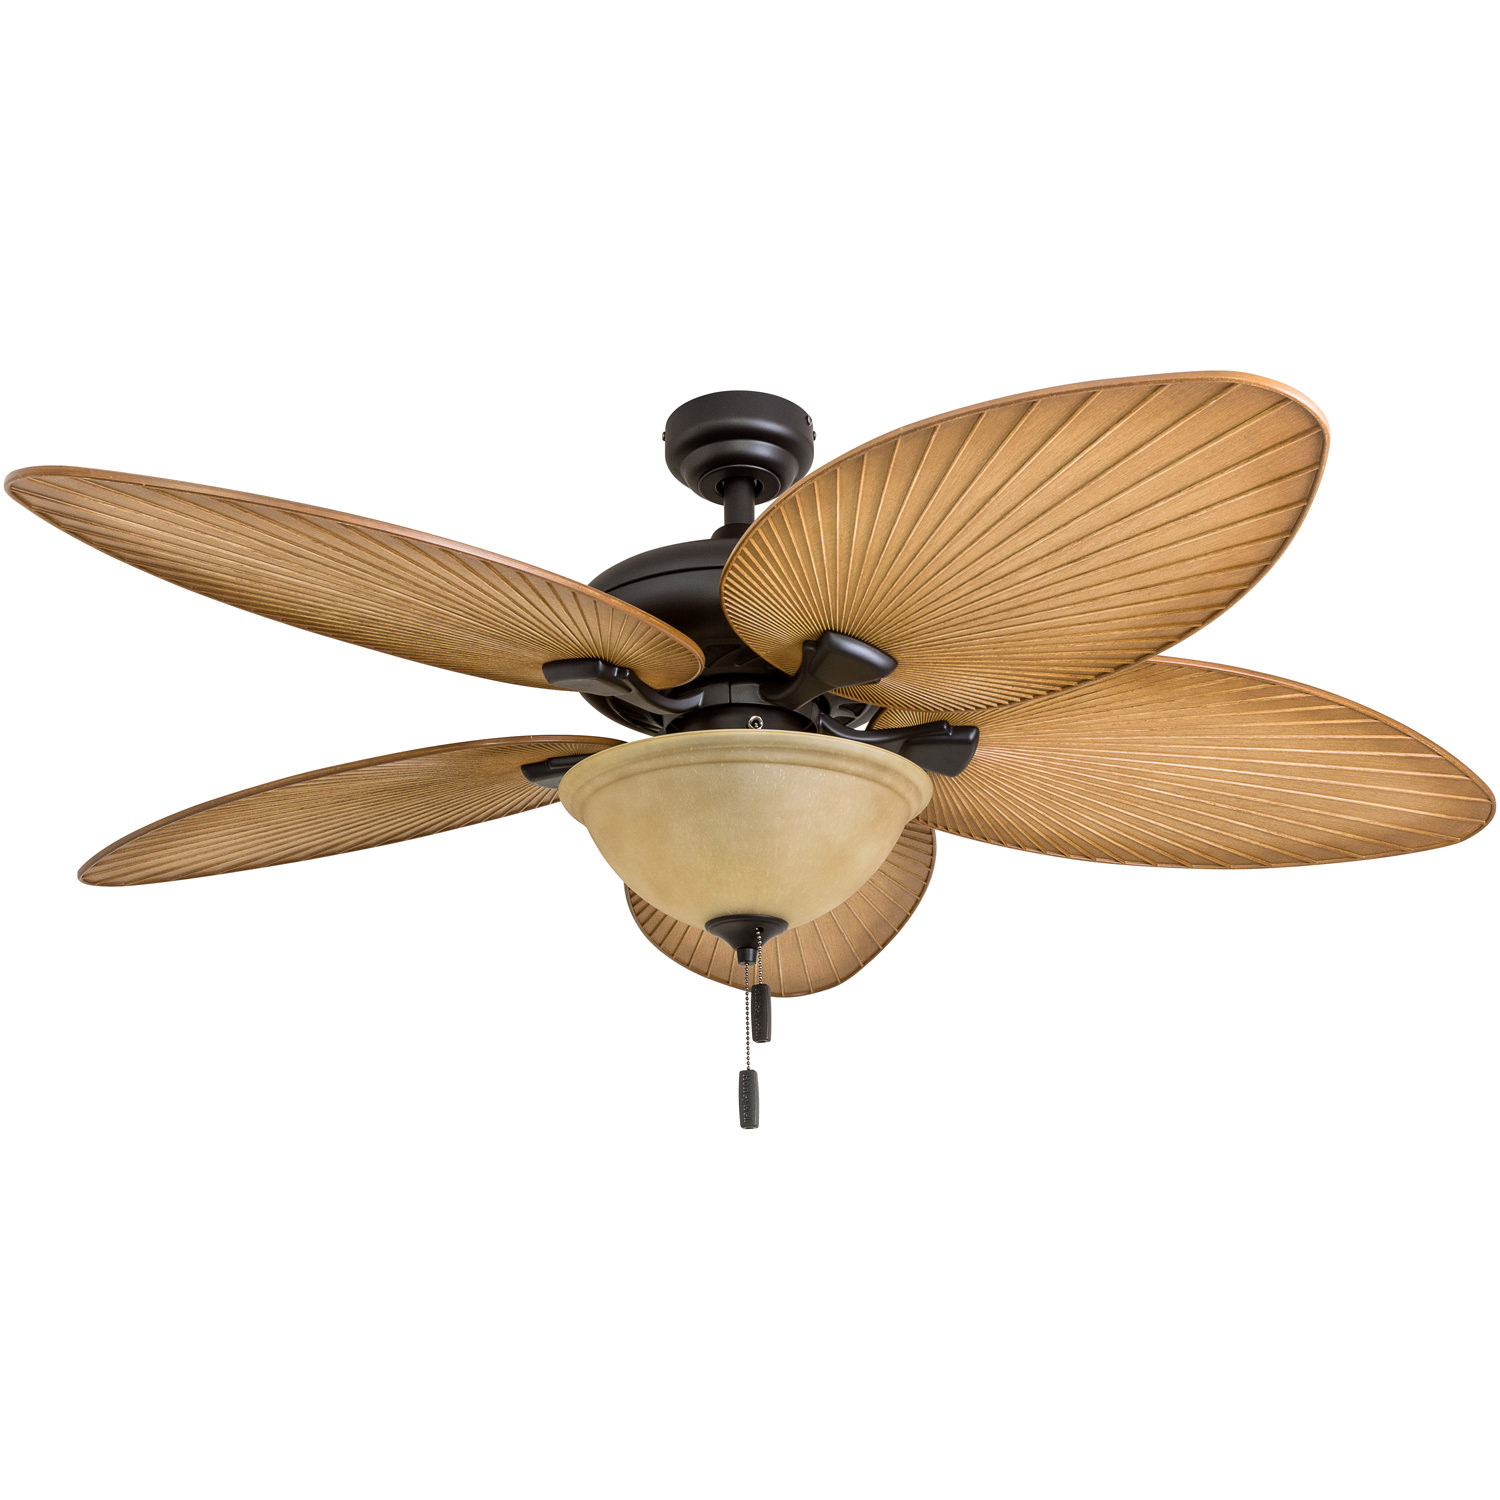 Honeywell Palm Valley 52" Bronze Outdoor Ceiling Fan with Lights - image 1 of 10